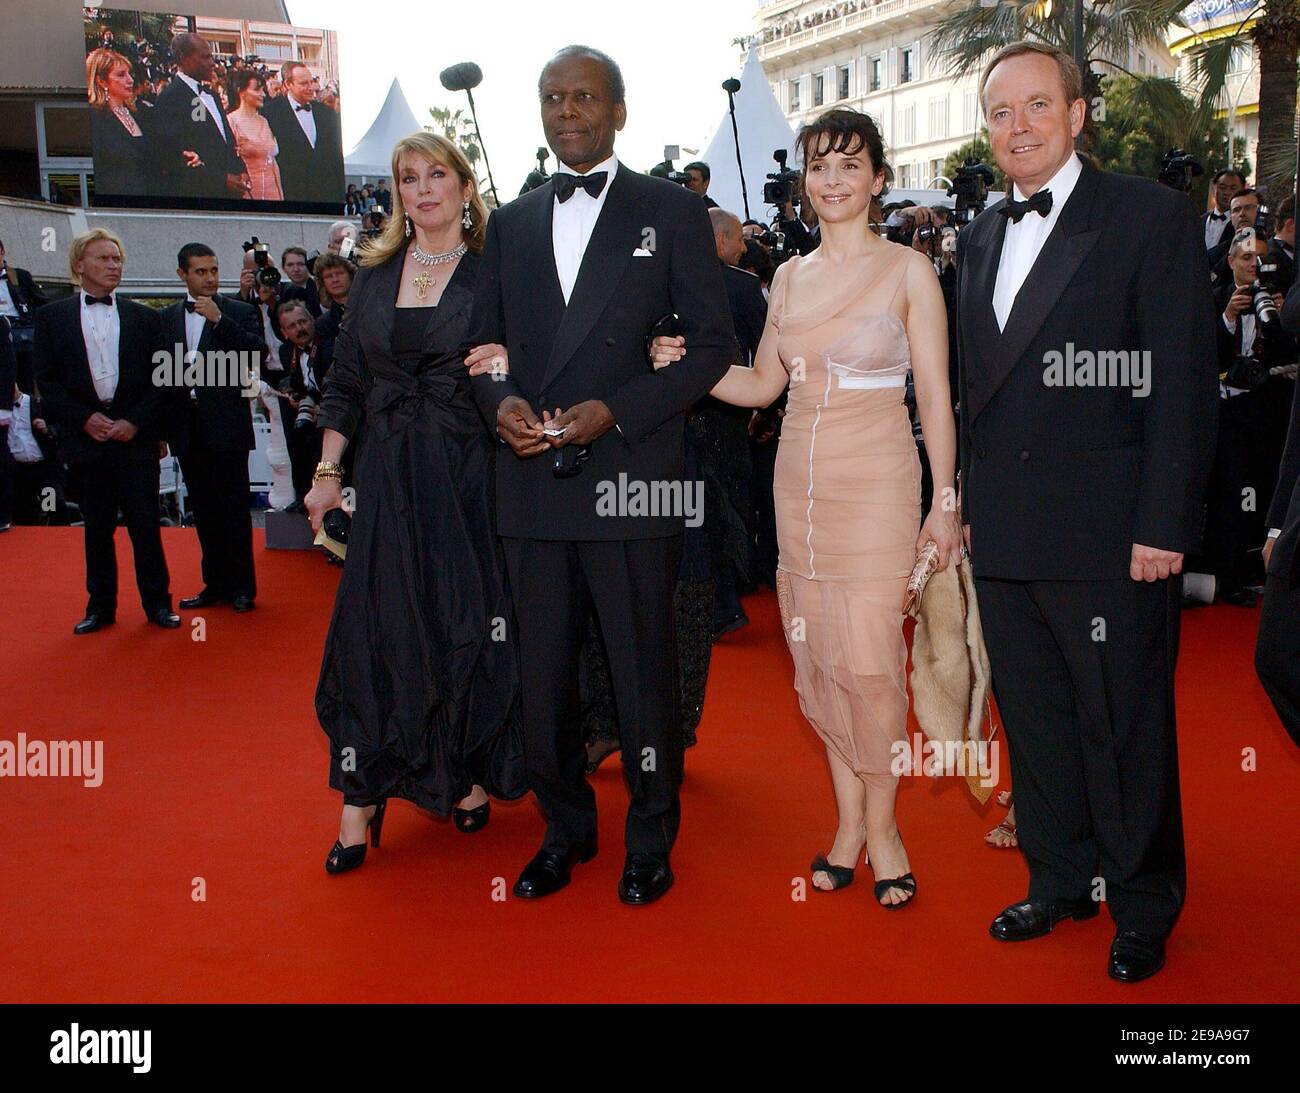 U.S. actor Sidney Poitier (2nd left), flanked by his wife Joanna Shimkus (L) and French actress Juliette Binoche, with French Culture Minister Renaud Donnedieu de Vabres arrive for the screening of US director Ron Howard's film 'The Da Vinci Code', opening the 59th International Cannes Film Festival, in Cannes, Southern France, on May 17, 2006. Photo by Hahn-Nebinger-Orban/ABACAPRESS.COM Stock Photo